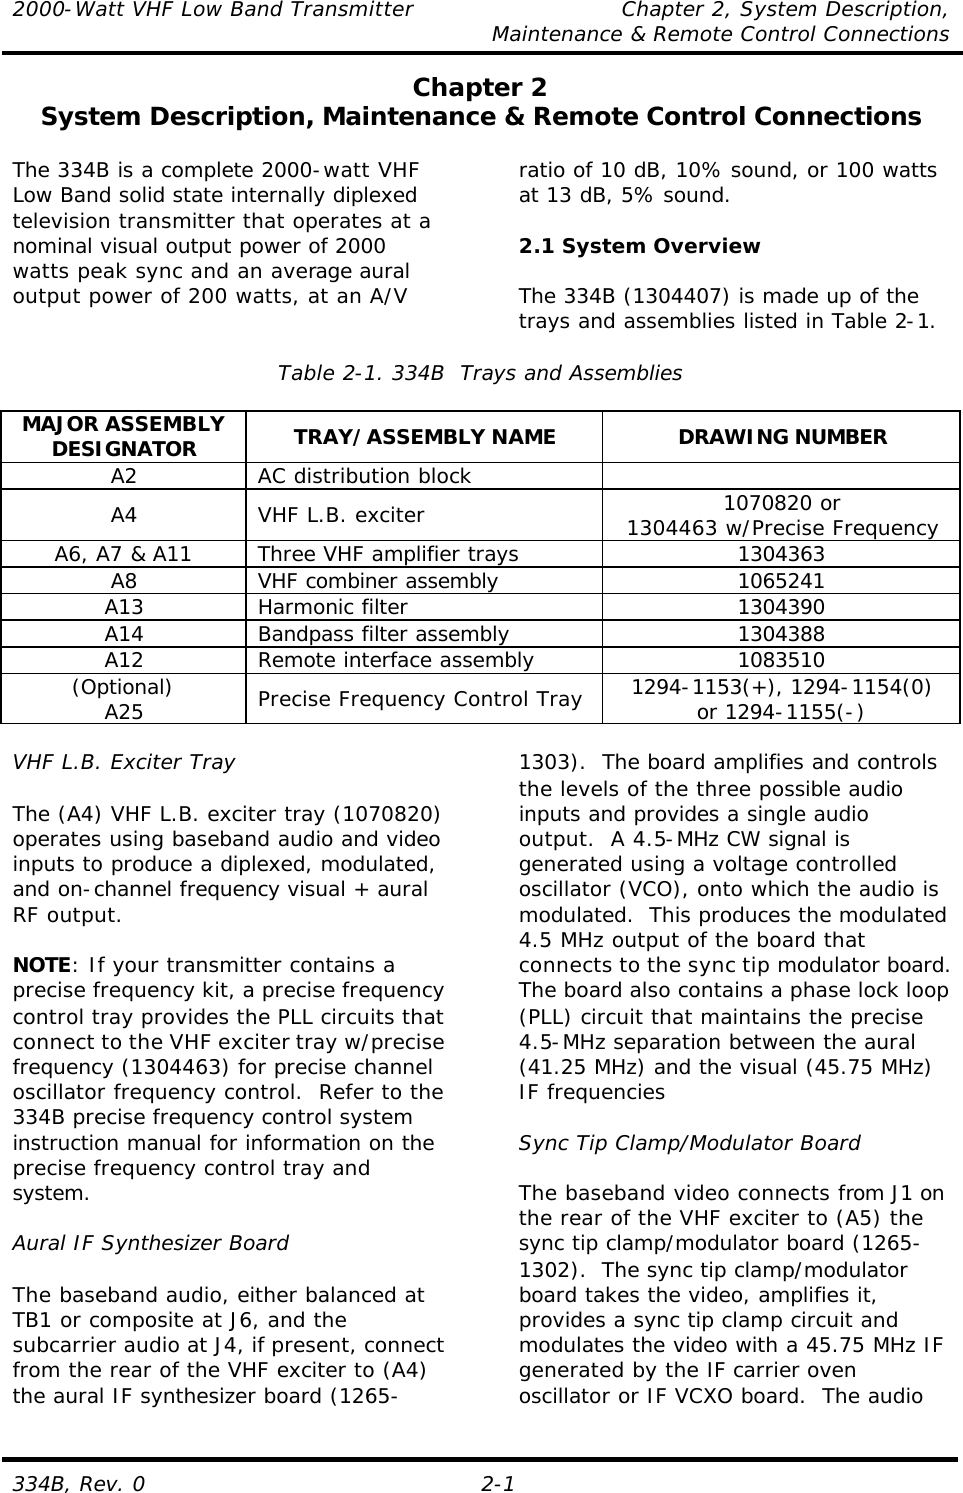 2000-Watt VHF Low Band Transmitter    Chapter 2, System Description,     Maintenance &amp; Remote Control Connections 334B, Rev. 0 2-1 Chapter 2 System Description, Maintenance &amp; Remote Control Connections  The 334B is a complete 2000-watt VHF Low Band solid state internally diplexed television transmitter that operates at a nominal visual output power of 2000 watts peak sync and an average aural output power of 200 watts, at an A/V ratio of 10 dB, 10% sound, or 100 watts at 13 dB, 5% sound.  2.1 System Overview  The 334B (1304407) is made up of the trays and assemblies listed in Table 2-1.  Table 2-1. 334B  Trays and Assemblies  MAJOR ASSEMBLY DESIGNATOR TRAY/ASSEMBLY NAME DRAWING NUMBER A2 AC distribution block   A4 VHF L.B. exciter 1070820 or 1304463 w/Precise Frequency A6, A7 &amp; A11 Three VHF amplifier trays 1304363 A8 VHF combiner assembly 1065241 A13 Harmonic filter 1304390 A14 Bandpass filter assembly 1304388 A12 Remote interface assembly 1083510 (Optional) A25 Precise Frequency Control Tray 1294-1153(+), 1294-1154(0) or 1294-1155(-)  VHF L.B. Exciter Tray  The (A4) VHF L.B. exciter tray (1070820) operates using baseband audio and video inputs to produce a diplexed, modulated, and on-channel frequency visual + aural RF output.  NOTE: If your transmitter contains a precise frequency kit, a precise frequency control tray provides the PLL circuits that connect to the VHF exciter tray w/precise frequency (1304463) for precise channel oscillator frequency control.  Refer to the 334B precise frequency control system instruction manual for information on the precise frequency control tray and system.  Aural IF Synthesizer Board  The baseband audio, either balanced at TB1 or composite at J6, and the subcarrier audio at J4, if present, connect from the rear of the VHF exciter to (A4) the aural IF synthesizer board (1265-1303).  The board amplifies and controls the levels of the three possible audio inputs and provides a single audio output.  A 4.5-MHz CW signal is generated using a voltage controlled oscillator (VCO), onto which the audio is modulated.  This produces the modulated 4.5 MHz output of the board that connects to the sync tip modulator board.  The board also contains a phase lock loop (PLL) circuit that maintains the precise 4.5-MHz separation between the aural (41.25 MHz) and the visual (45.75 MHz) IF frequencies  Sync Tip Clamp/Modulator Board  The baseband video connects from J1 on the rear of the VHF exciter to (A5) the sync tip clamp/modulator board (1265-1302).  The sync tip clamp/modulator board takes the video, amplifies it, provides a sync tip clamp circuit and modulates the video with a 45.75 MHz IF generated by the IF carrier oven oscillator or IF VCXO board.  The audio 